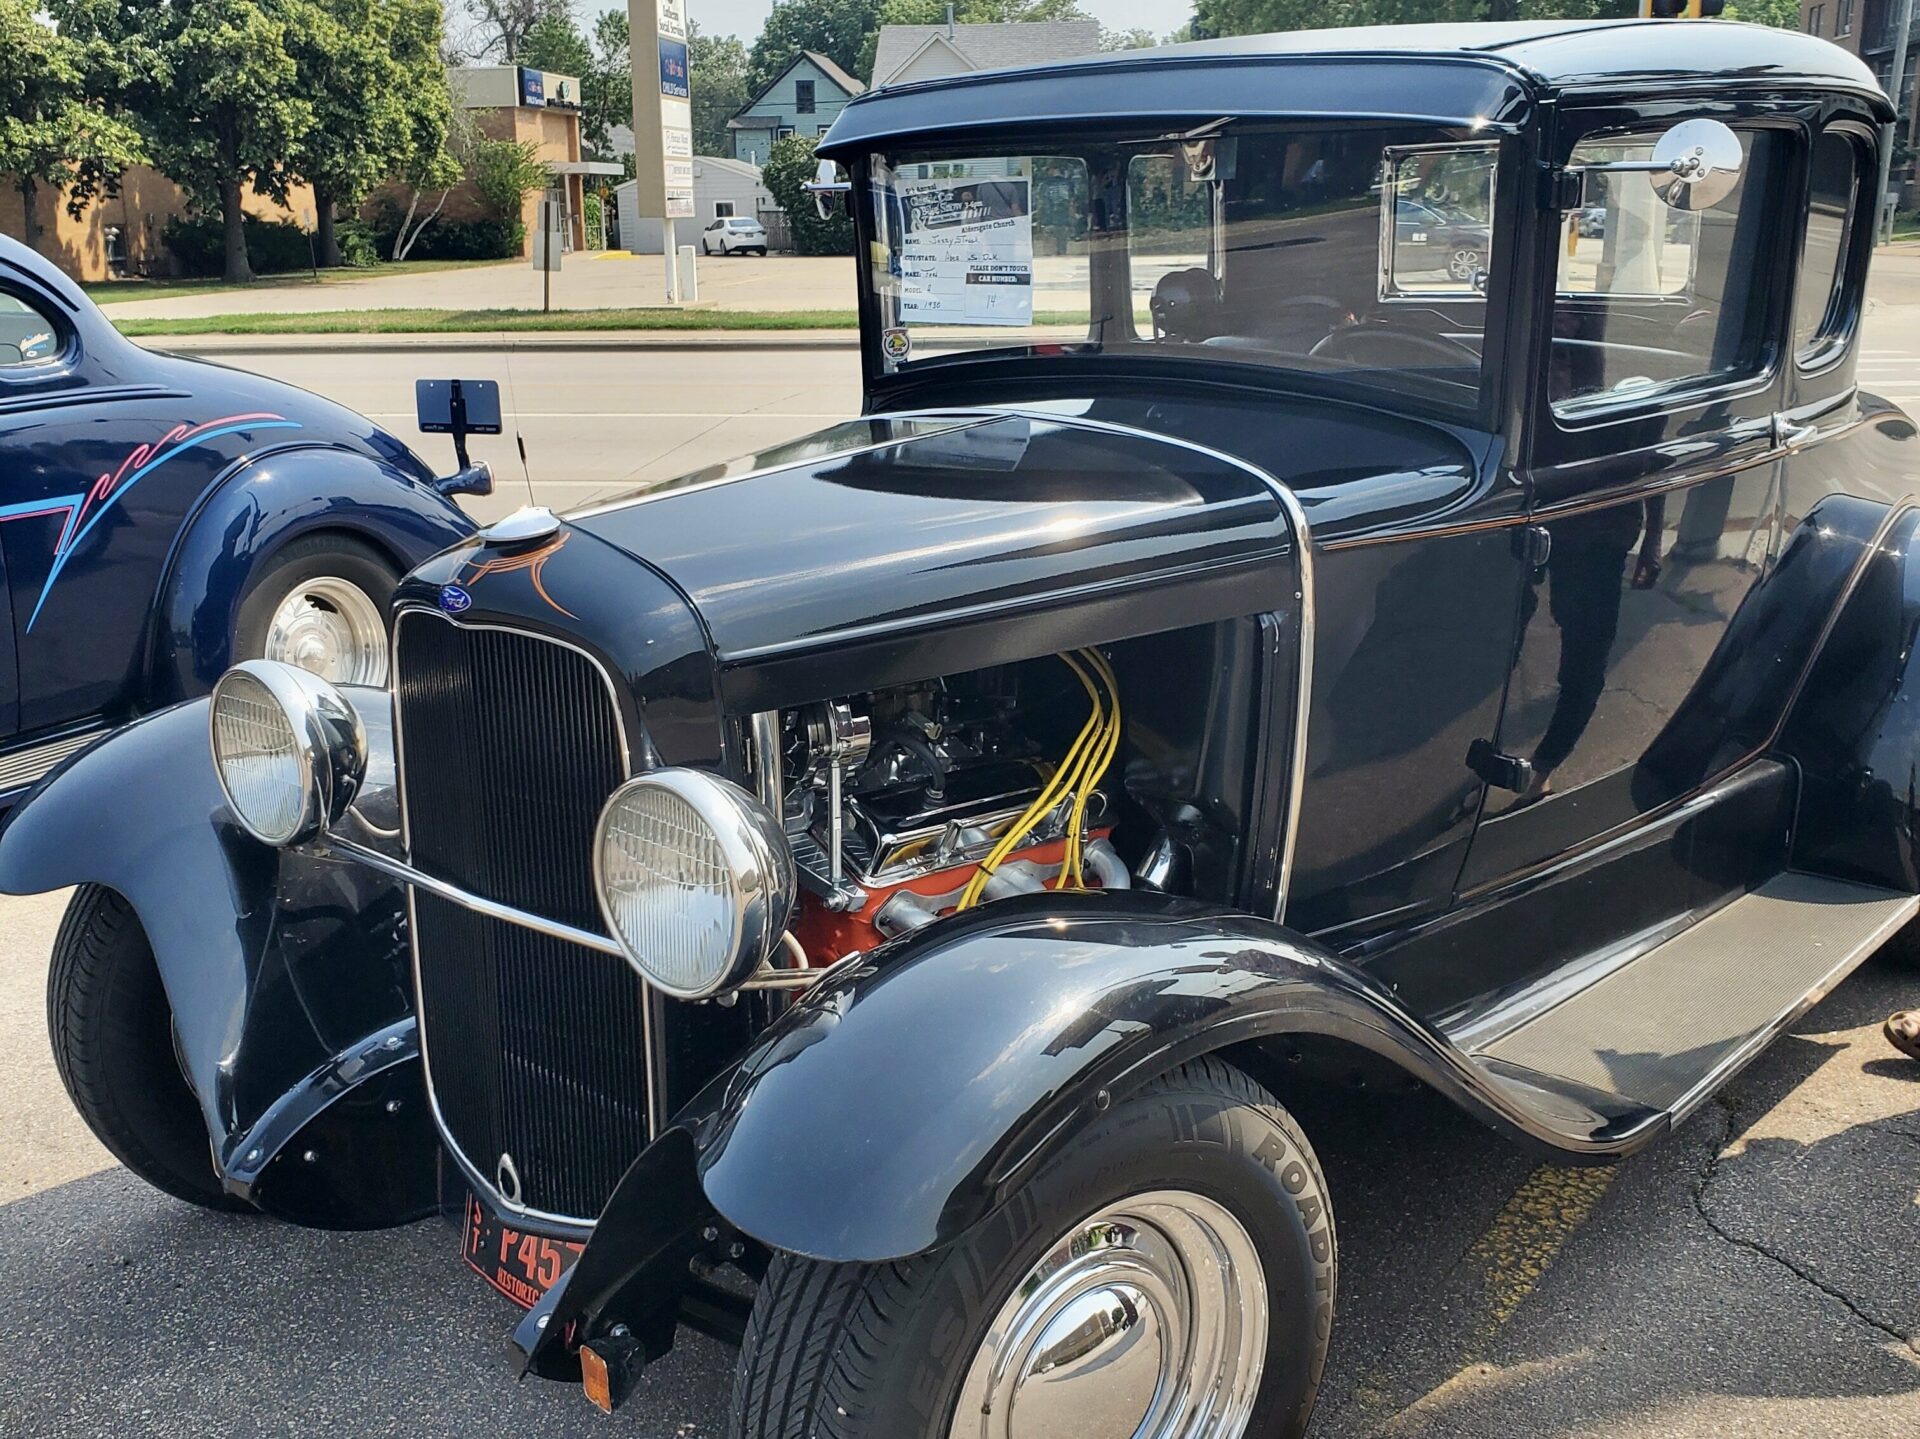 A 1930 Ford Model A was on display during a classic car and bike show at Aldersgate Church on Sunday, June 25. Aberdeen Insider photo by Annie Scott